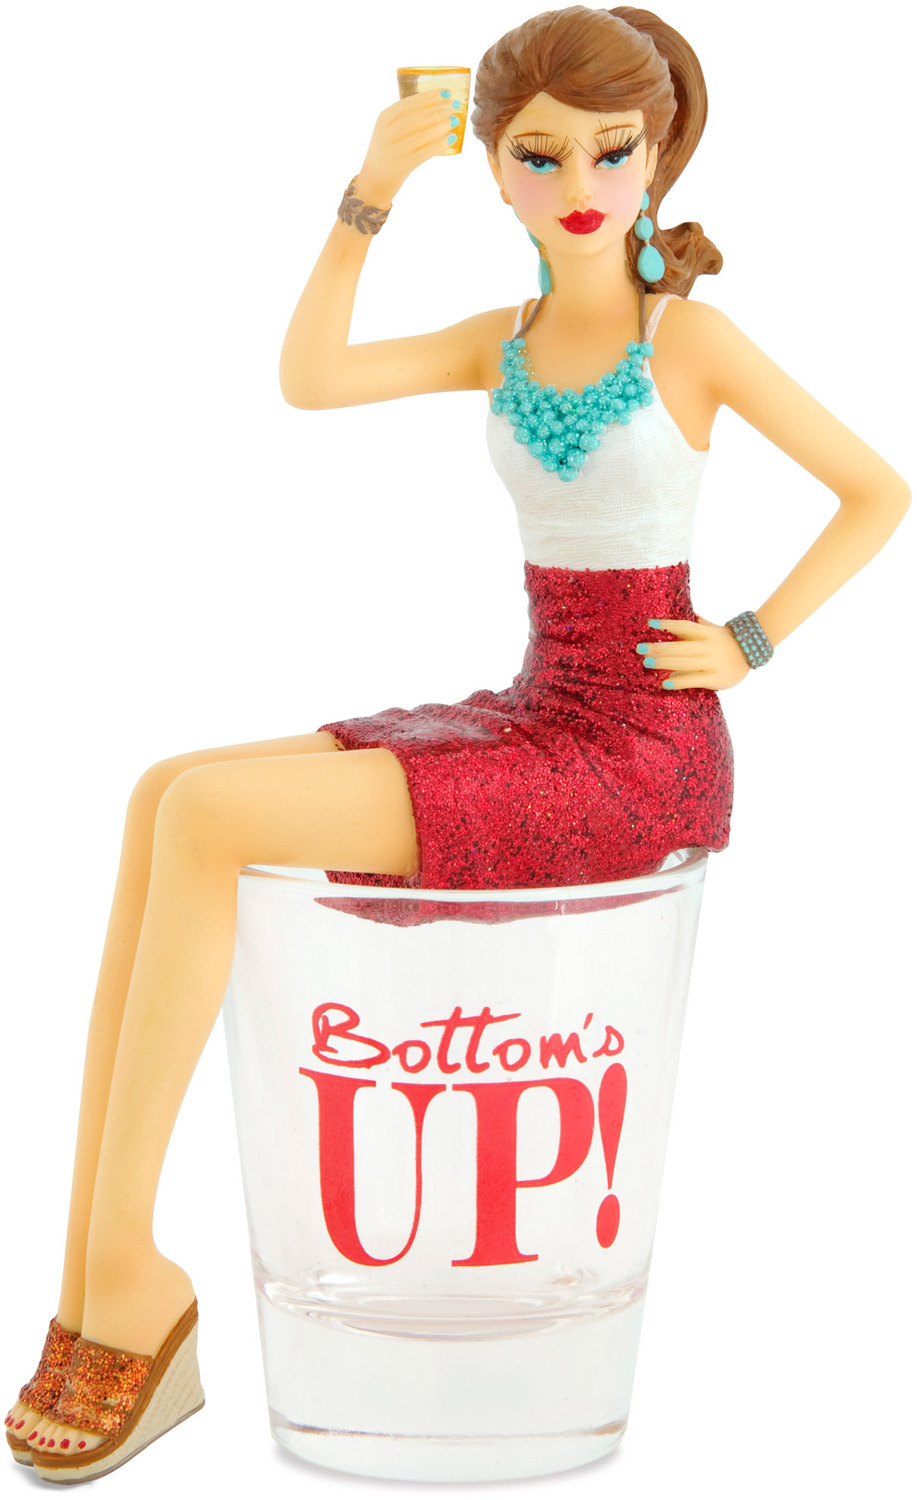 Bottoms Up by Hiccup - Bottoms Up - 6" Girl in Shot Glass